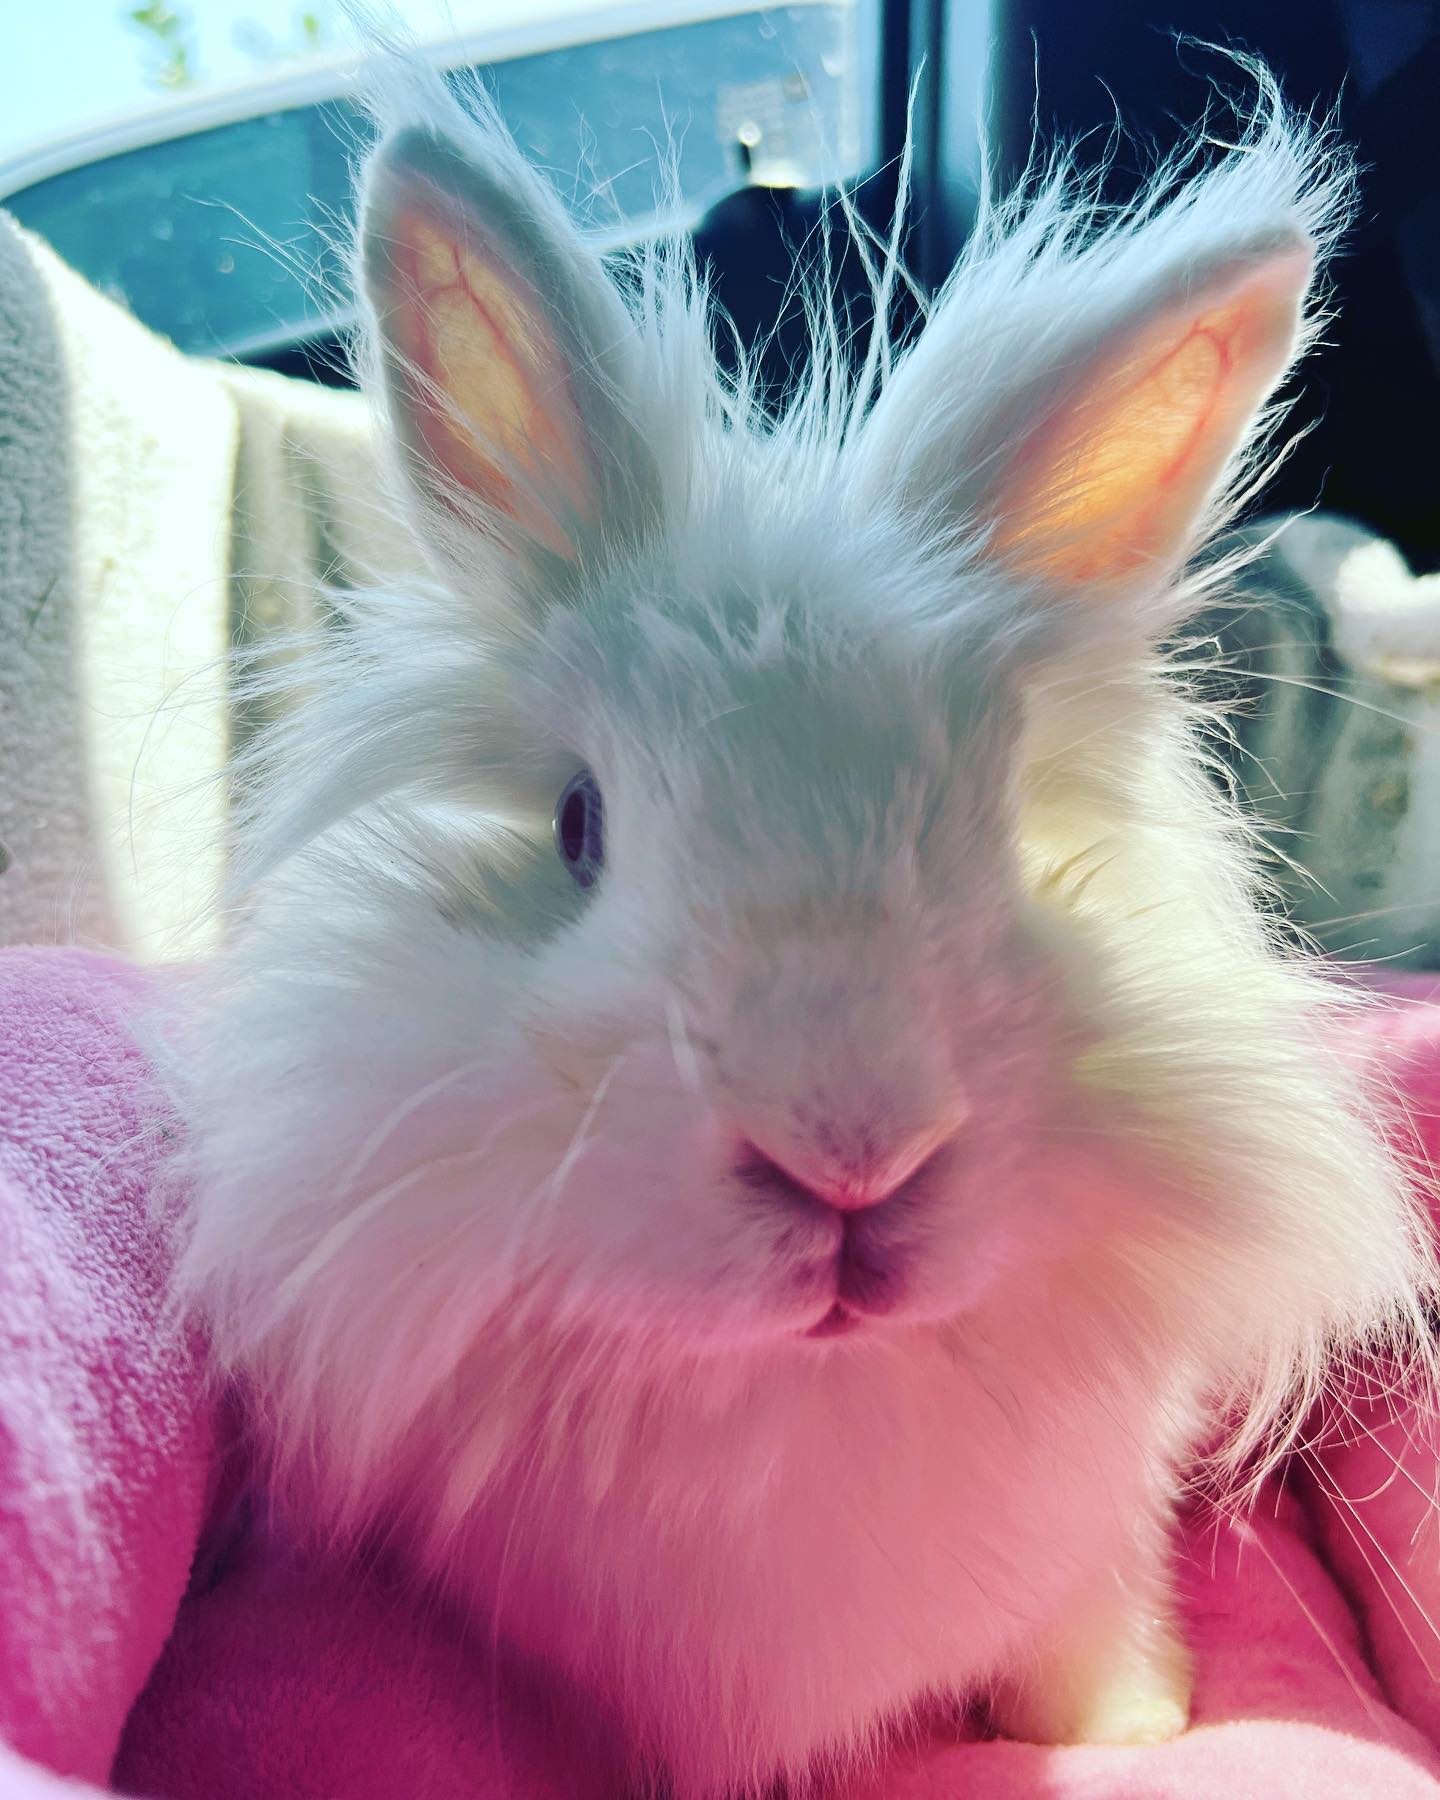 Image of a fluffy white domestic rabbit in a pink pet bed.